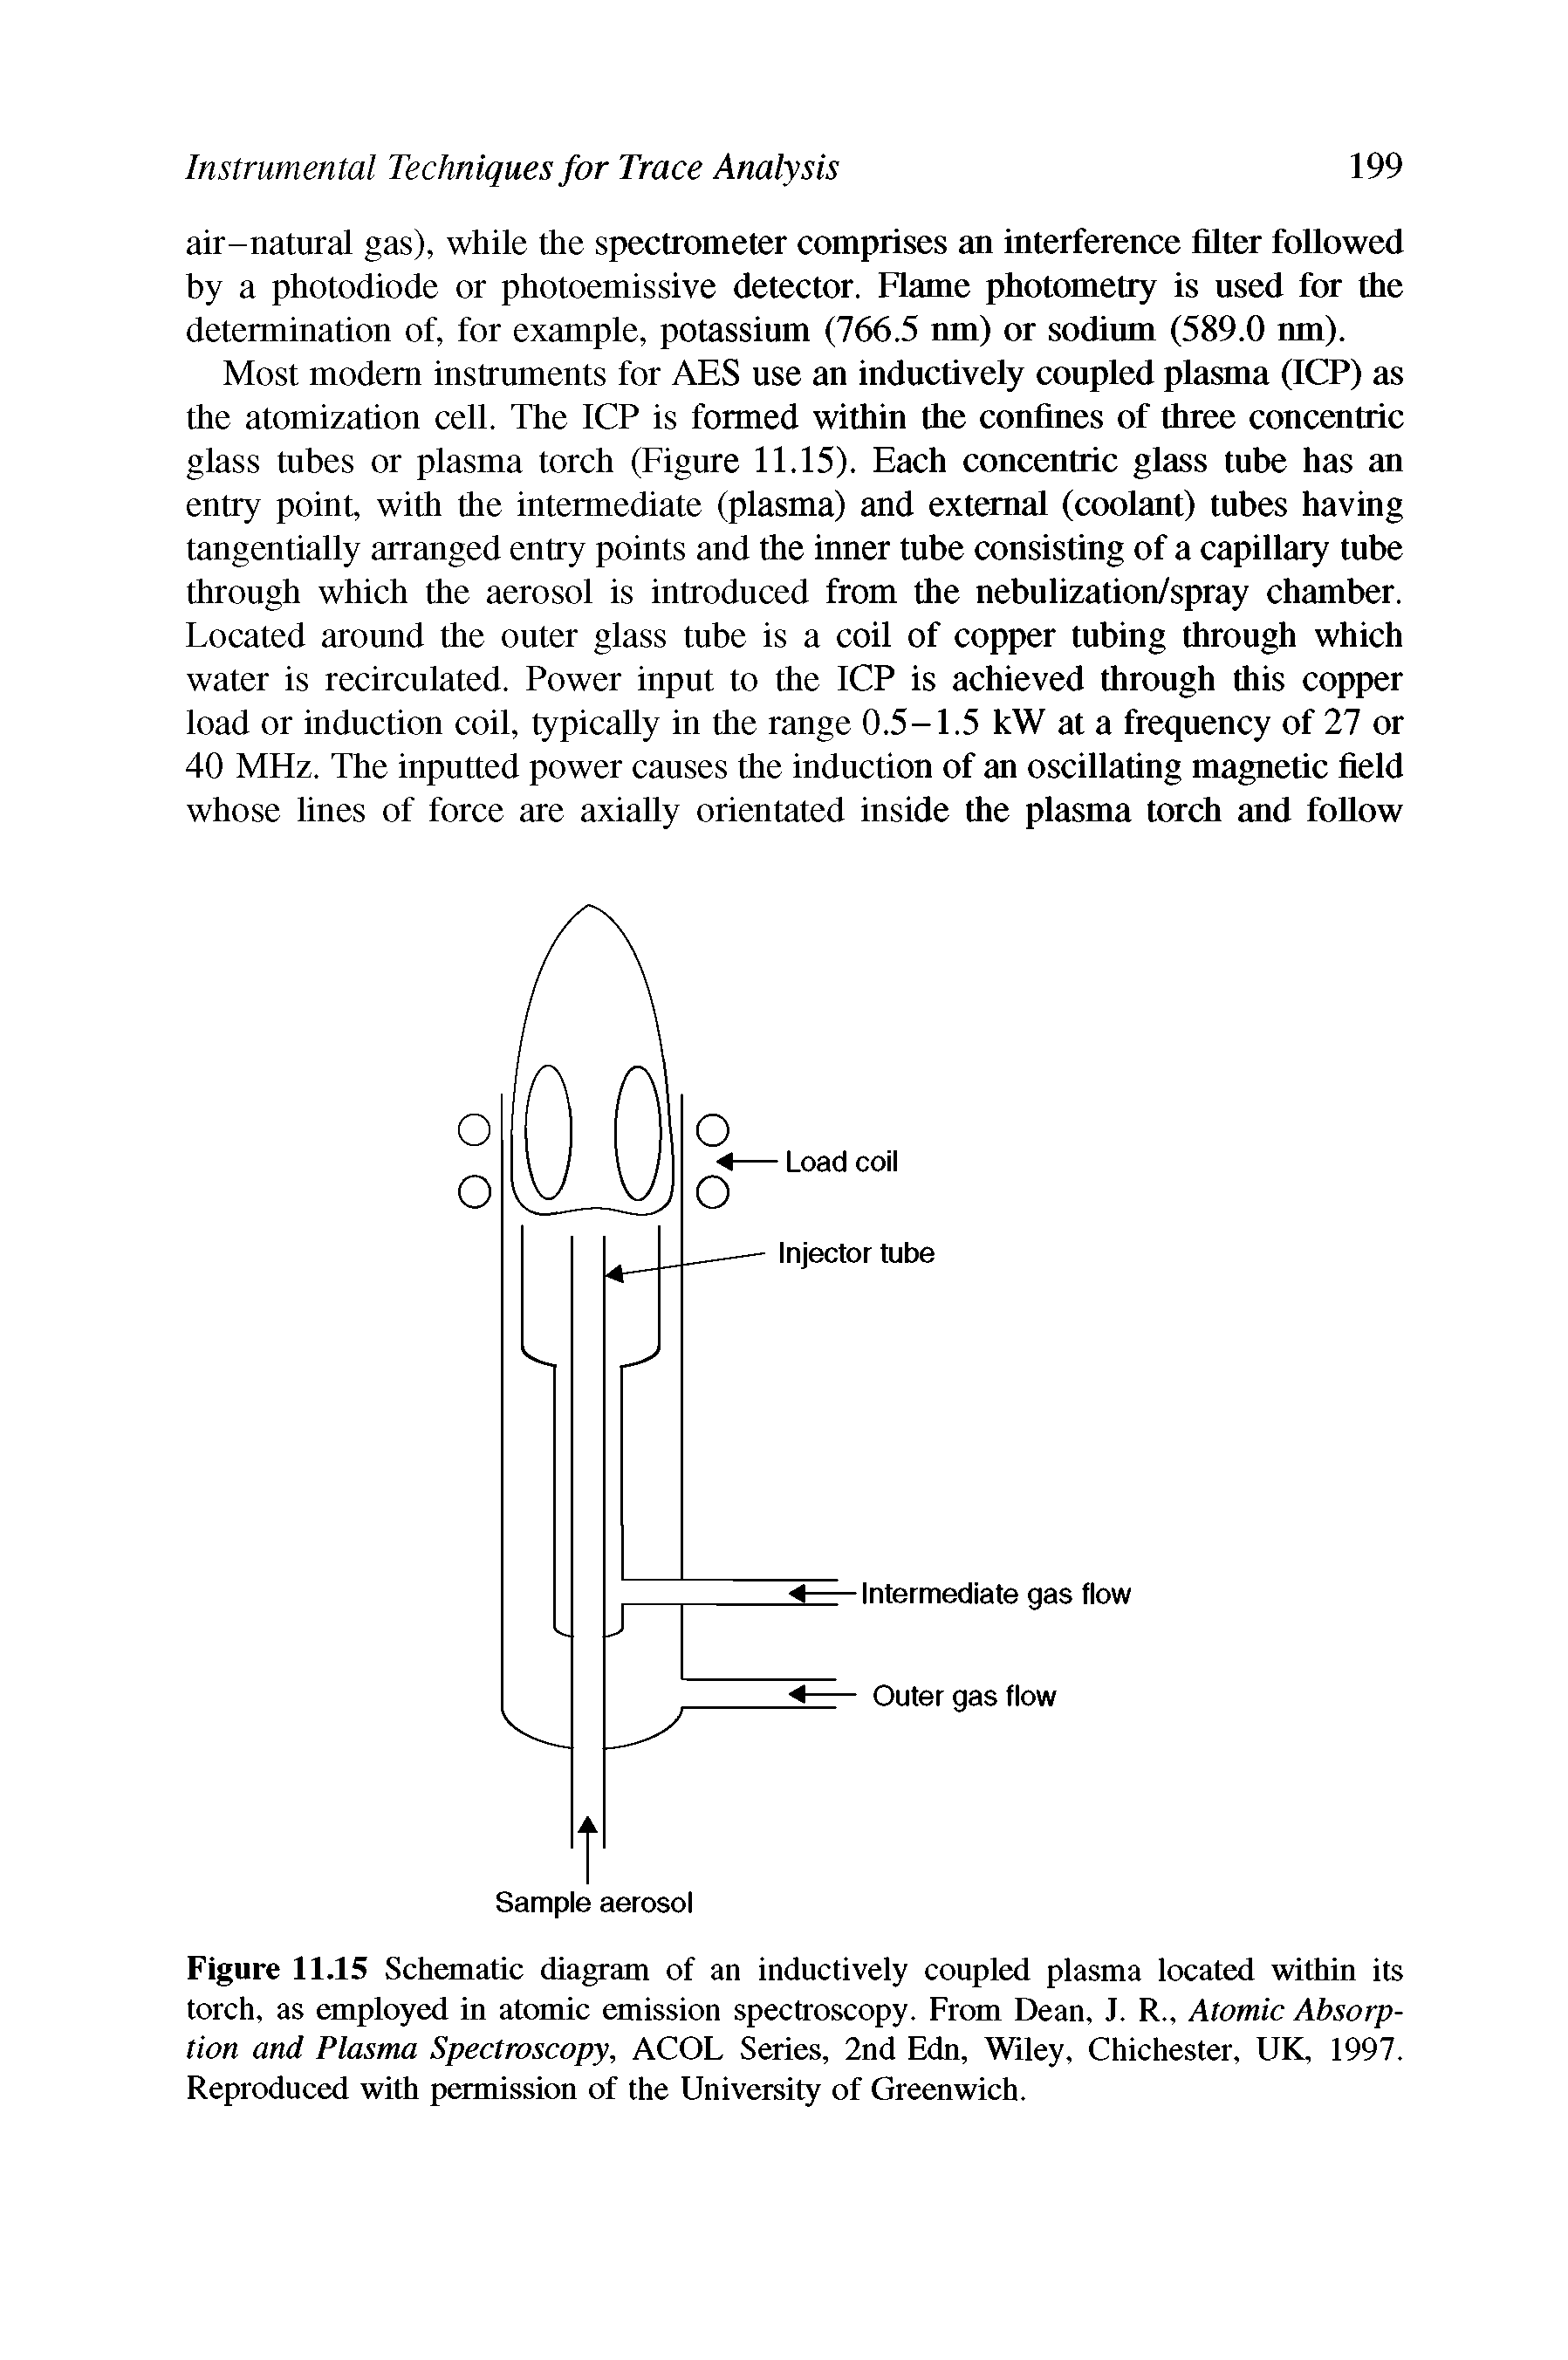 Figure 11.15 Schematic diagram of an inductively coupled plasma located within its torch, as employed in atomic emission spectroscopy. From Dean, J. R., Atomic Absorption and Plasma Spectroscopy, ACOL Series, 2nd Edn, Wiley, Chichester, UK, 1997. Reproduced with permission of the University of Greenwich.